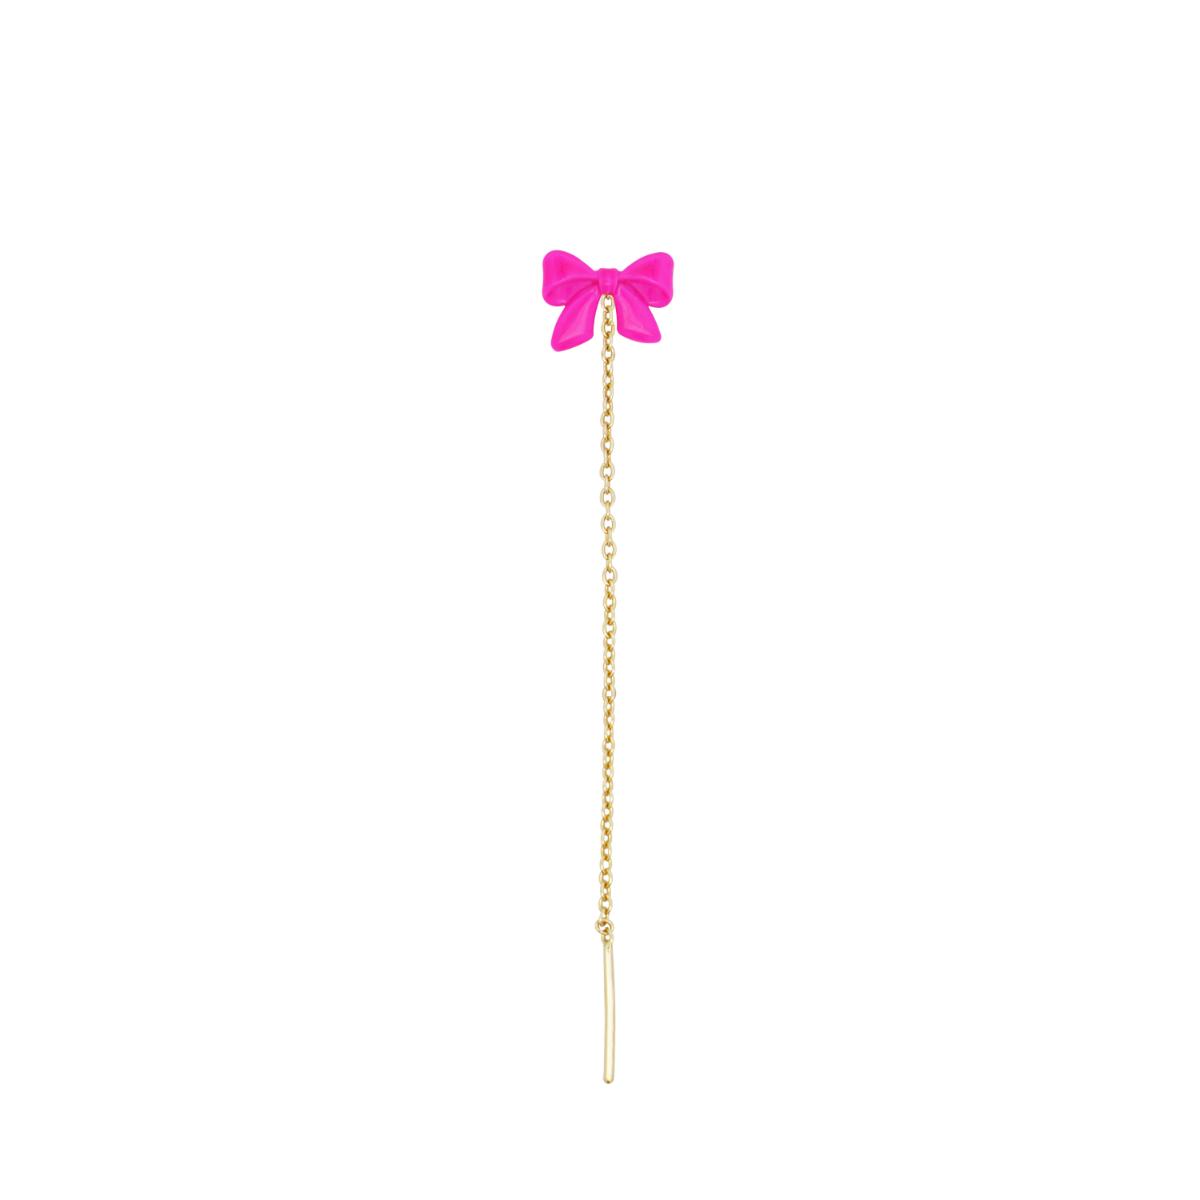 Earrings - Single earring with dangling chain and bow neon pink - CANDY BOW - 1 | Rue des Mille